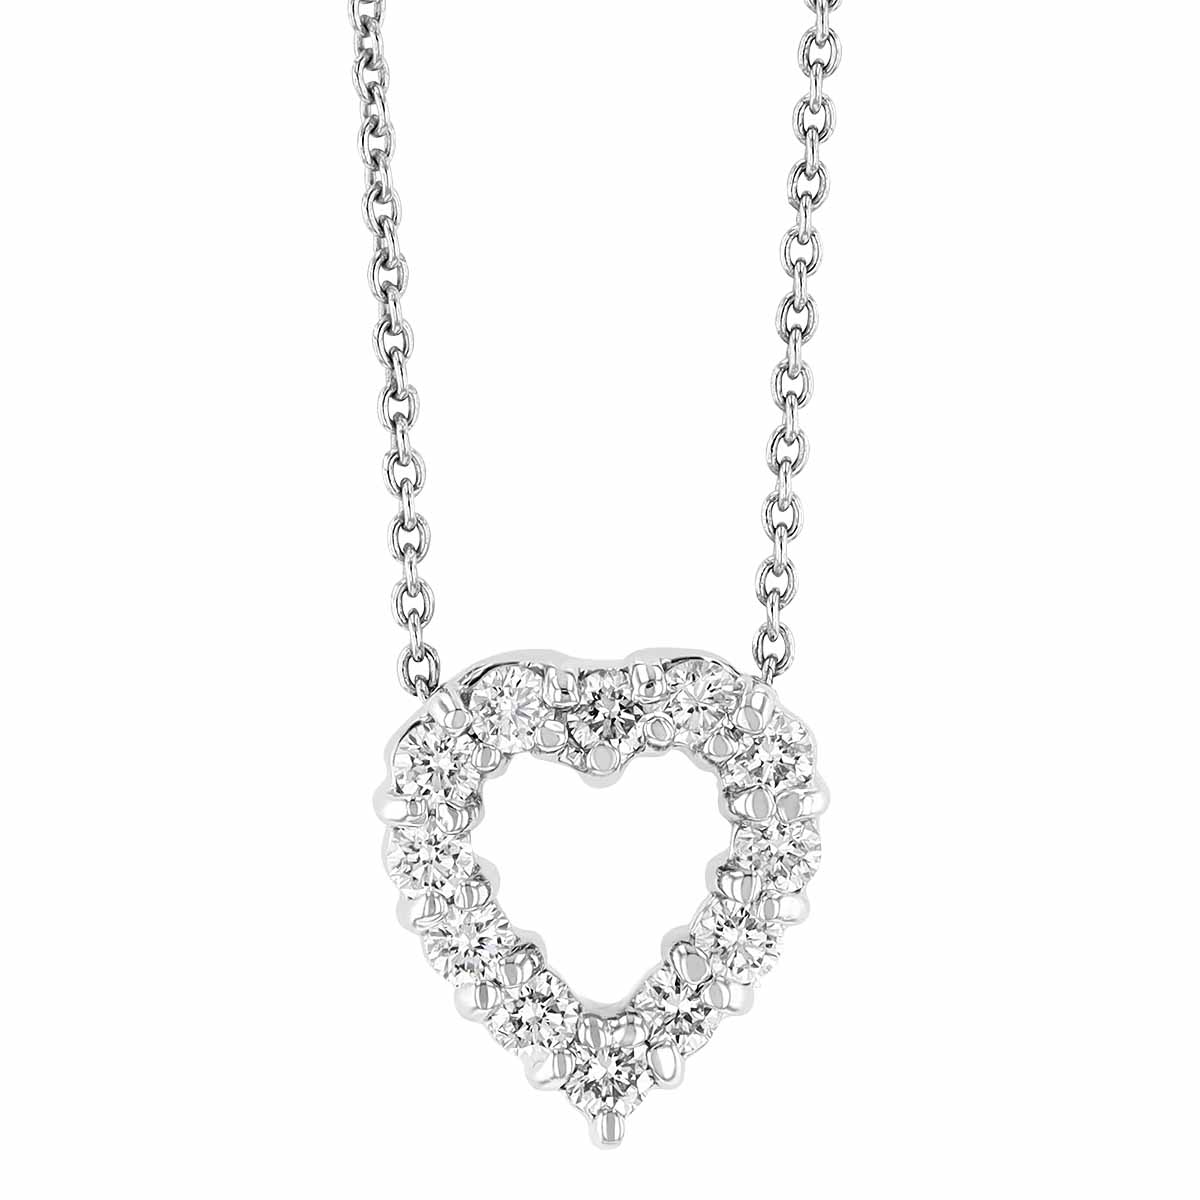 Roberto Coin Diamond Heart Necklace in White Gold, 0.26 cttw